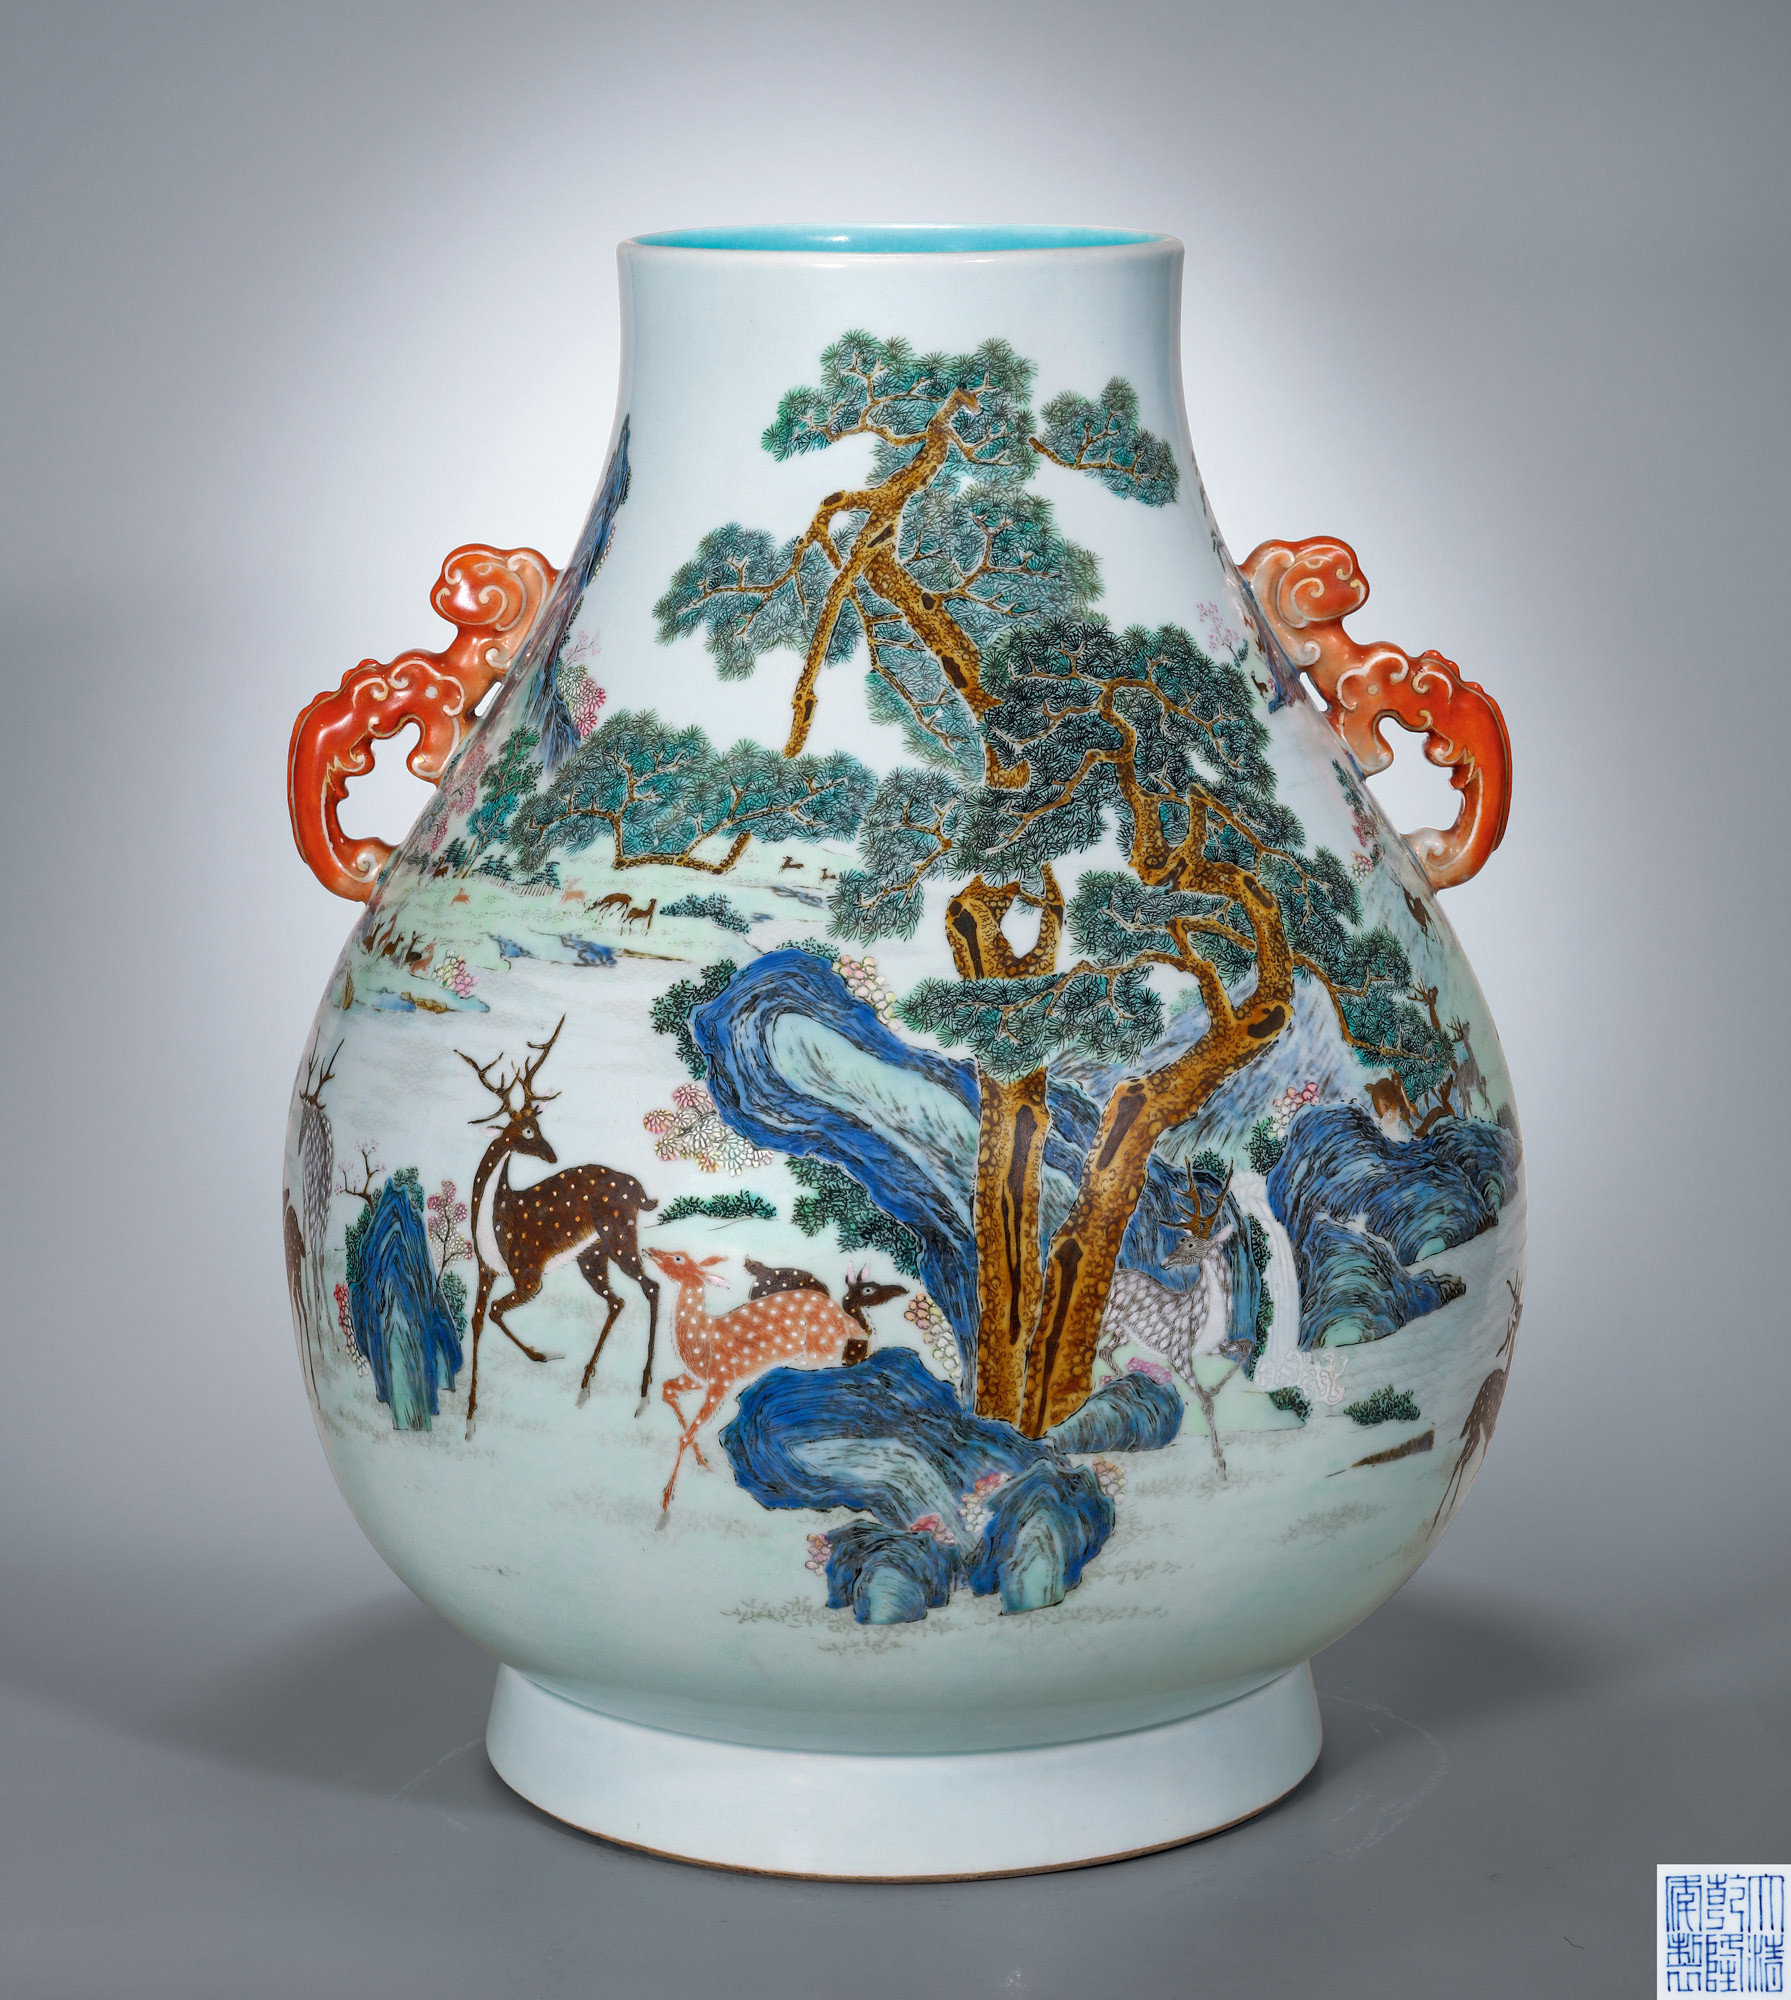 A MAGNIFICENT AND LARGE FAMILLE-ROSE ‘HUNDRED DEERS’ VASE WITH HANDLES